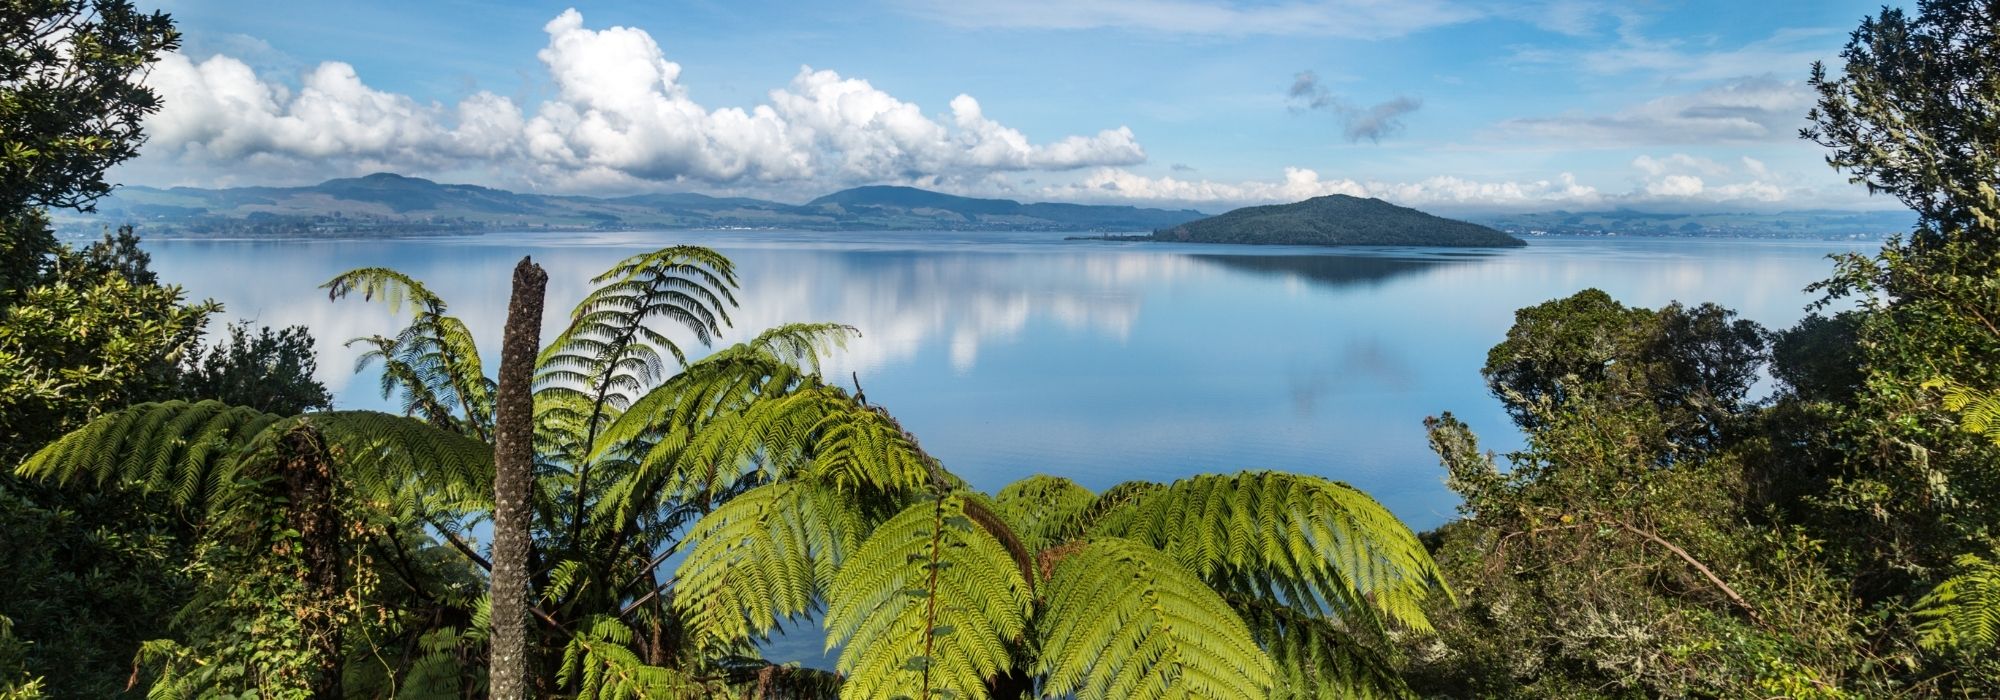 Rotorua: The perfect central location for exploring